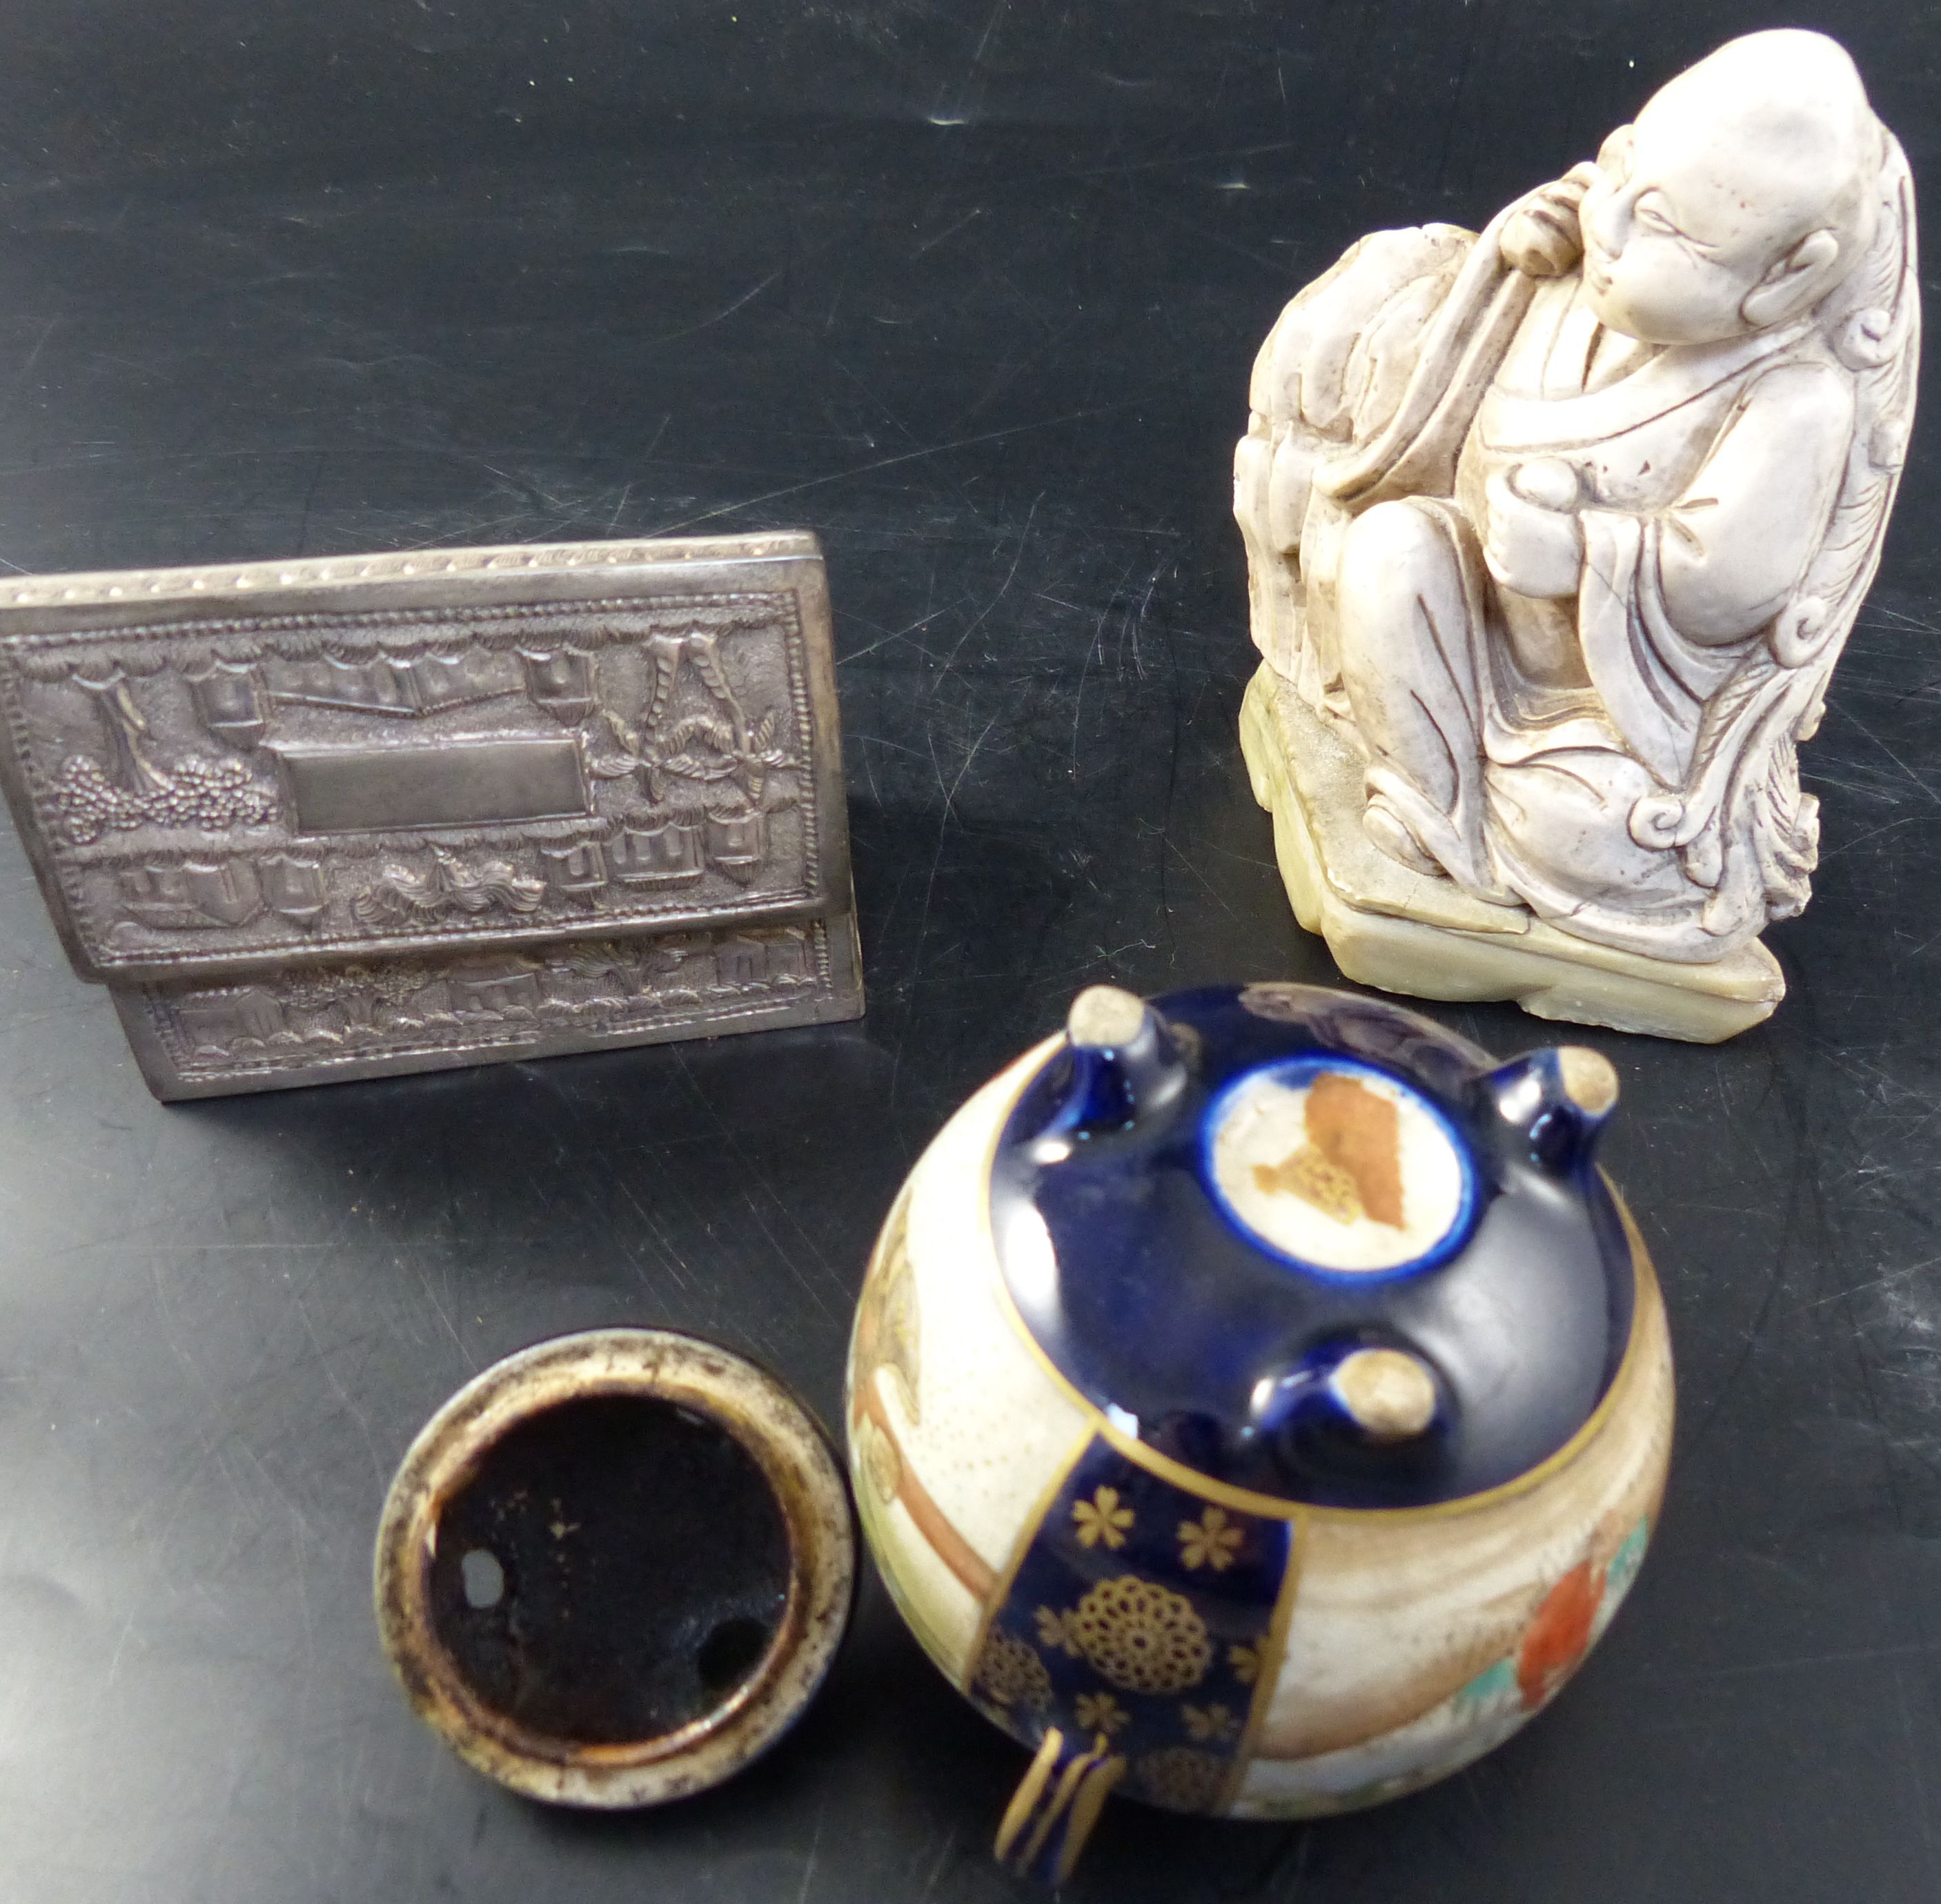 An early 20th century Indian white metal casket, a Satsuma koro, and a Chinese soap